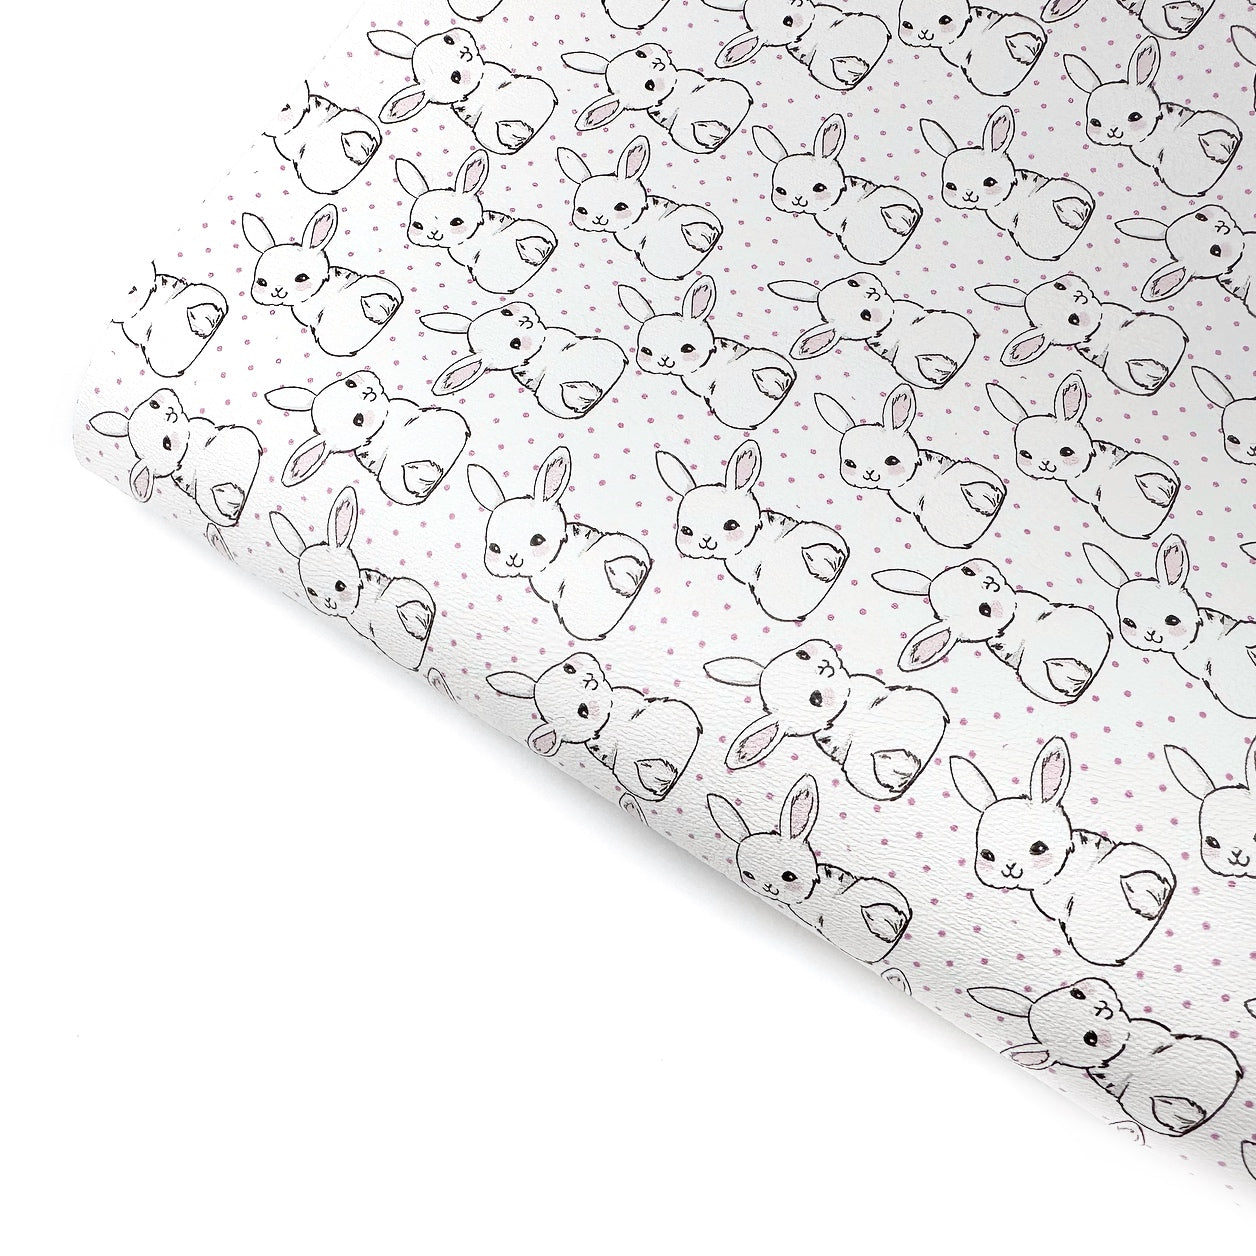 Polka Dot White Bunny Tails Premium Faux Leather Fabric Sheets